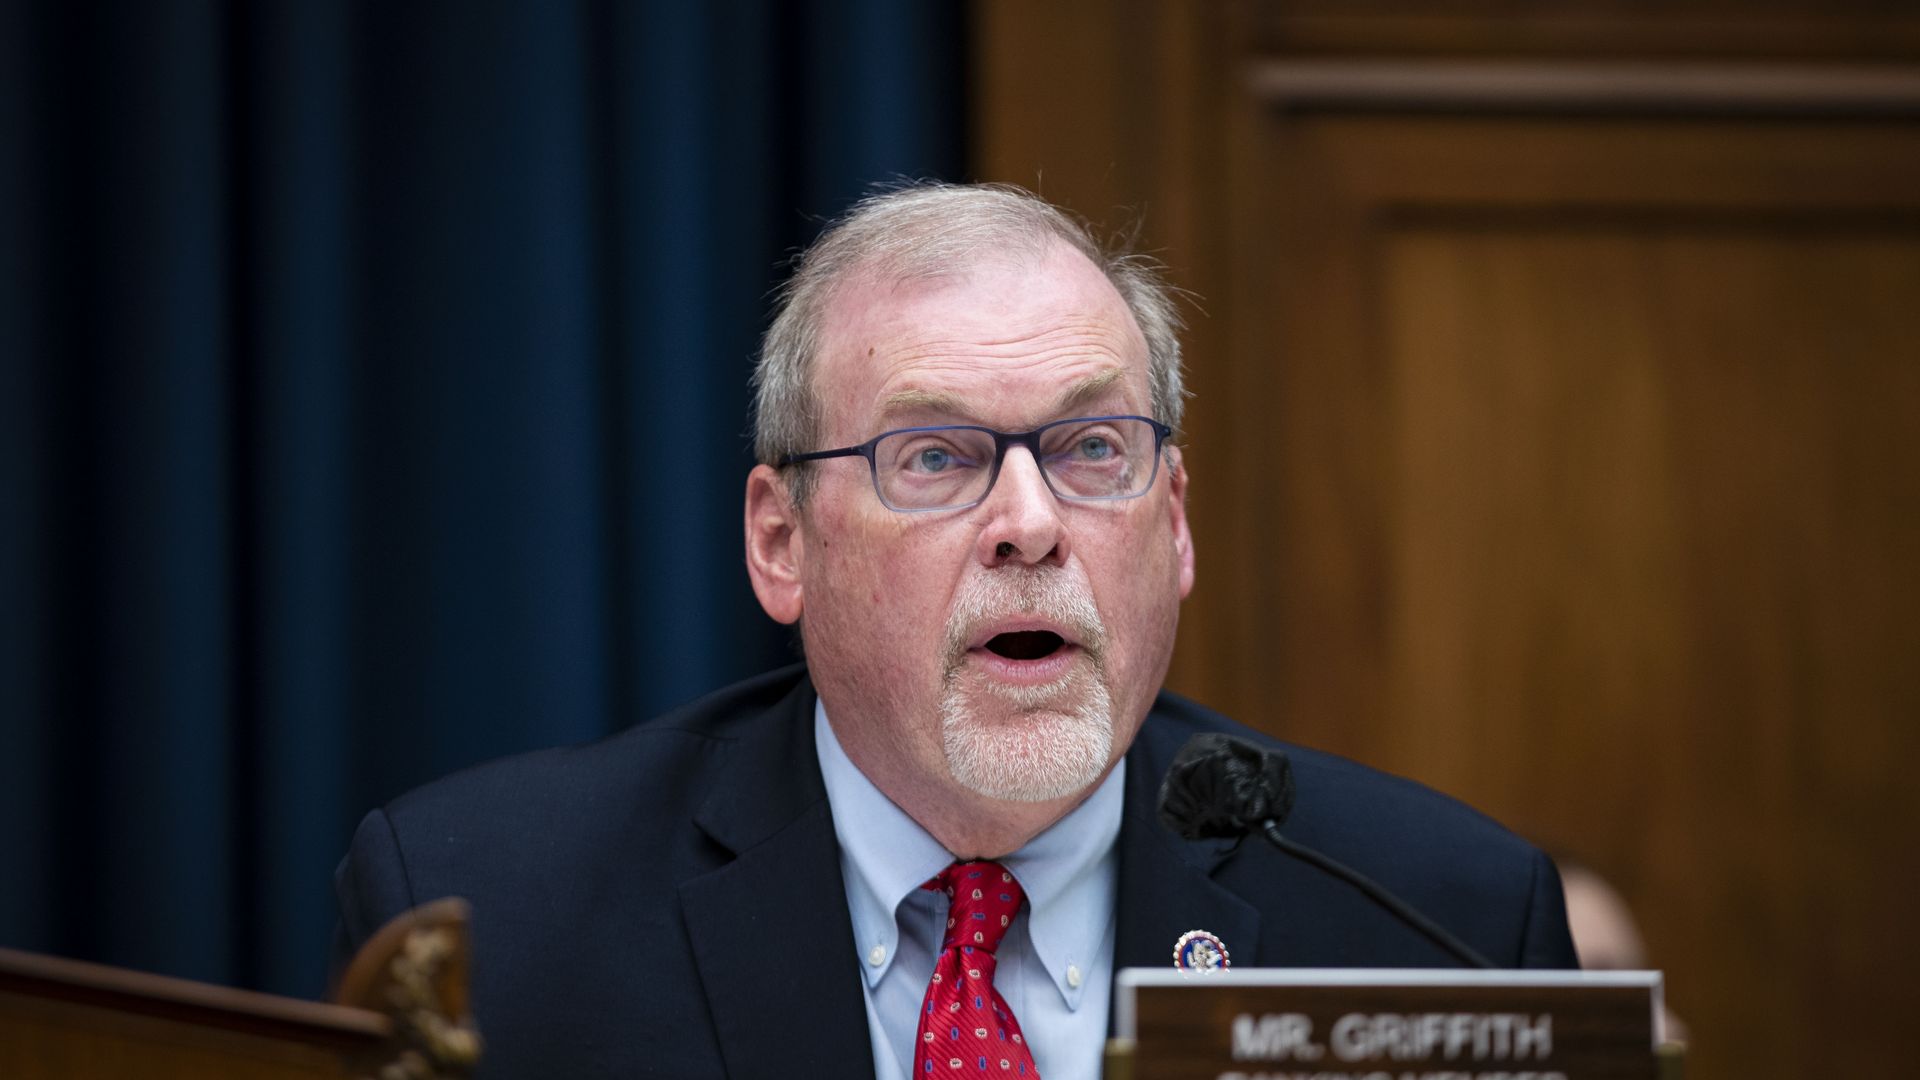 Morgan Griffith speaks during a hearing on April 6, 2022. Photo: Al Drago/Bloomberg via Getty Images